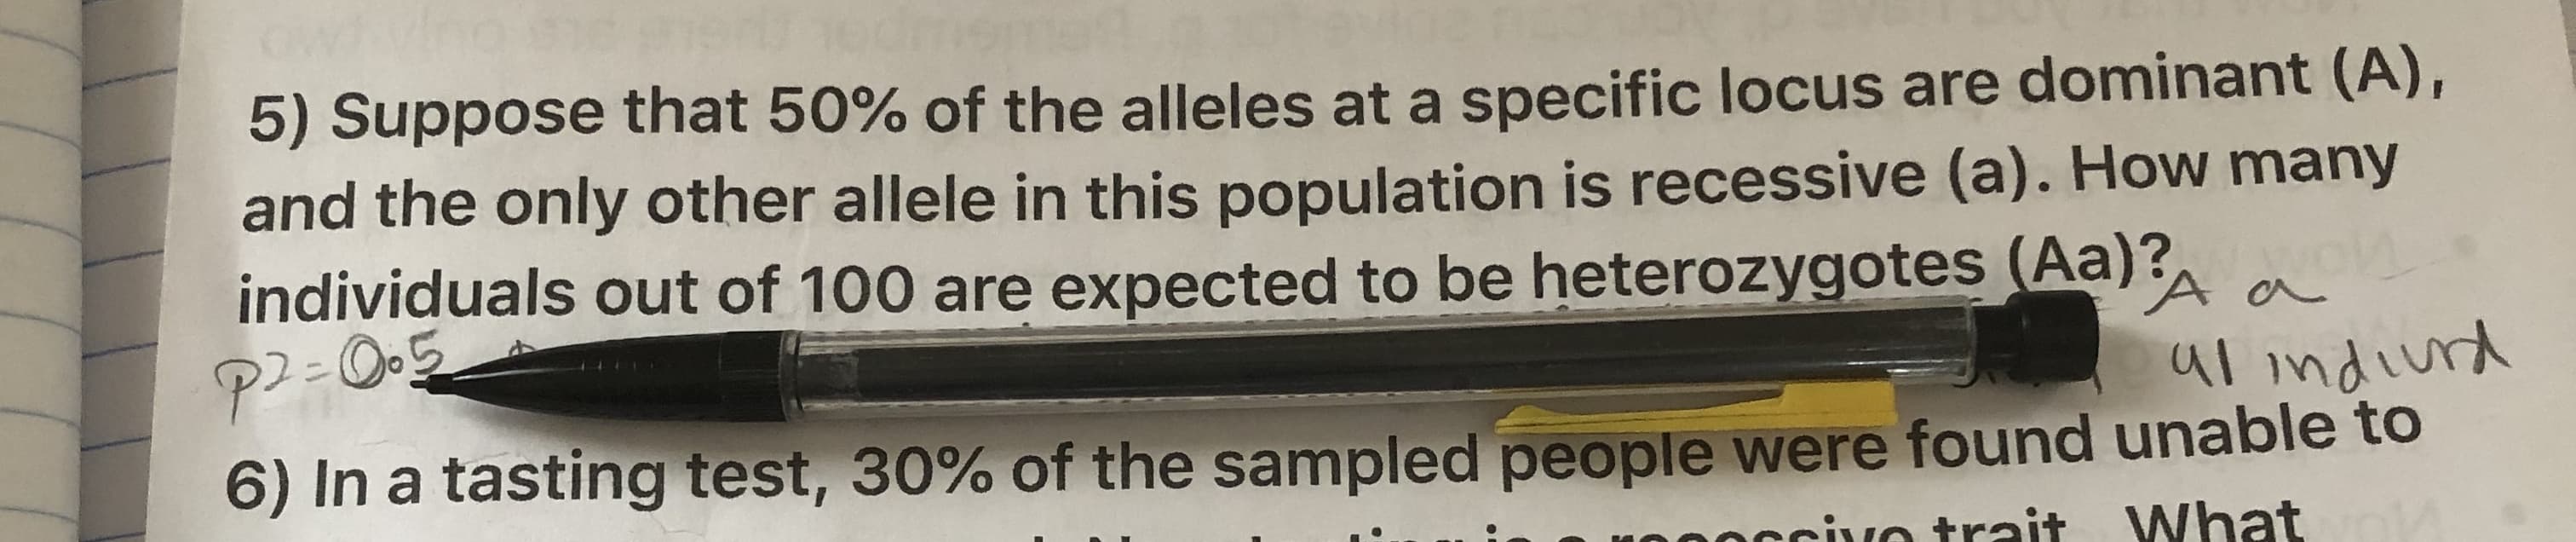 5) Suppose that 50% of the alleles at a specific locus are dominant (A),
and the only other allele in this population is recessive (a). How many
individyals out of 100 are expected to be heterozygotes (Aa)?
